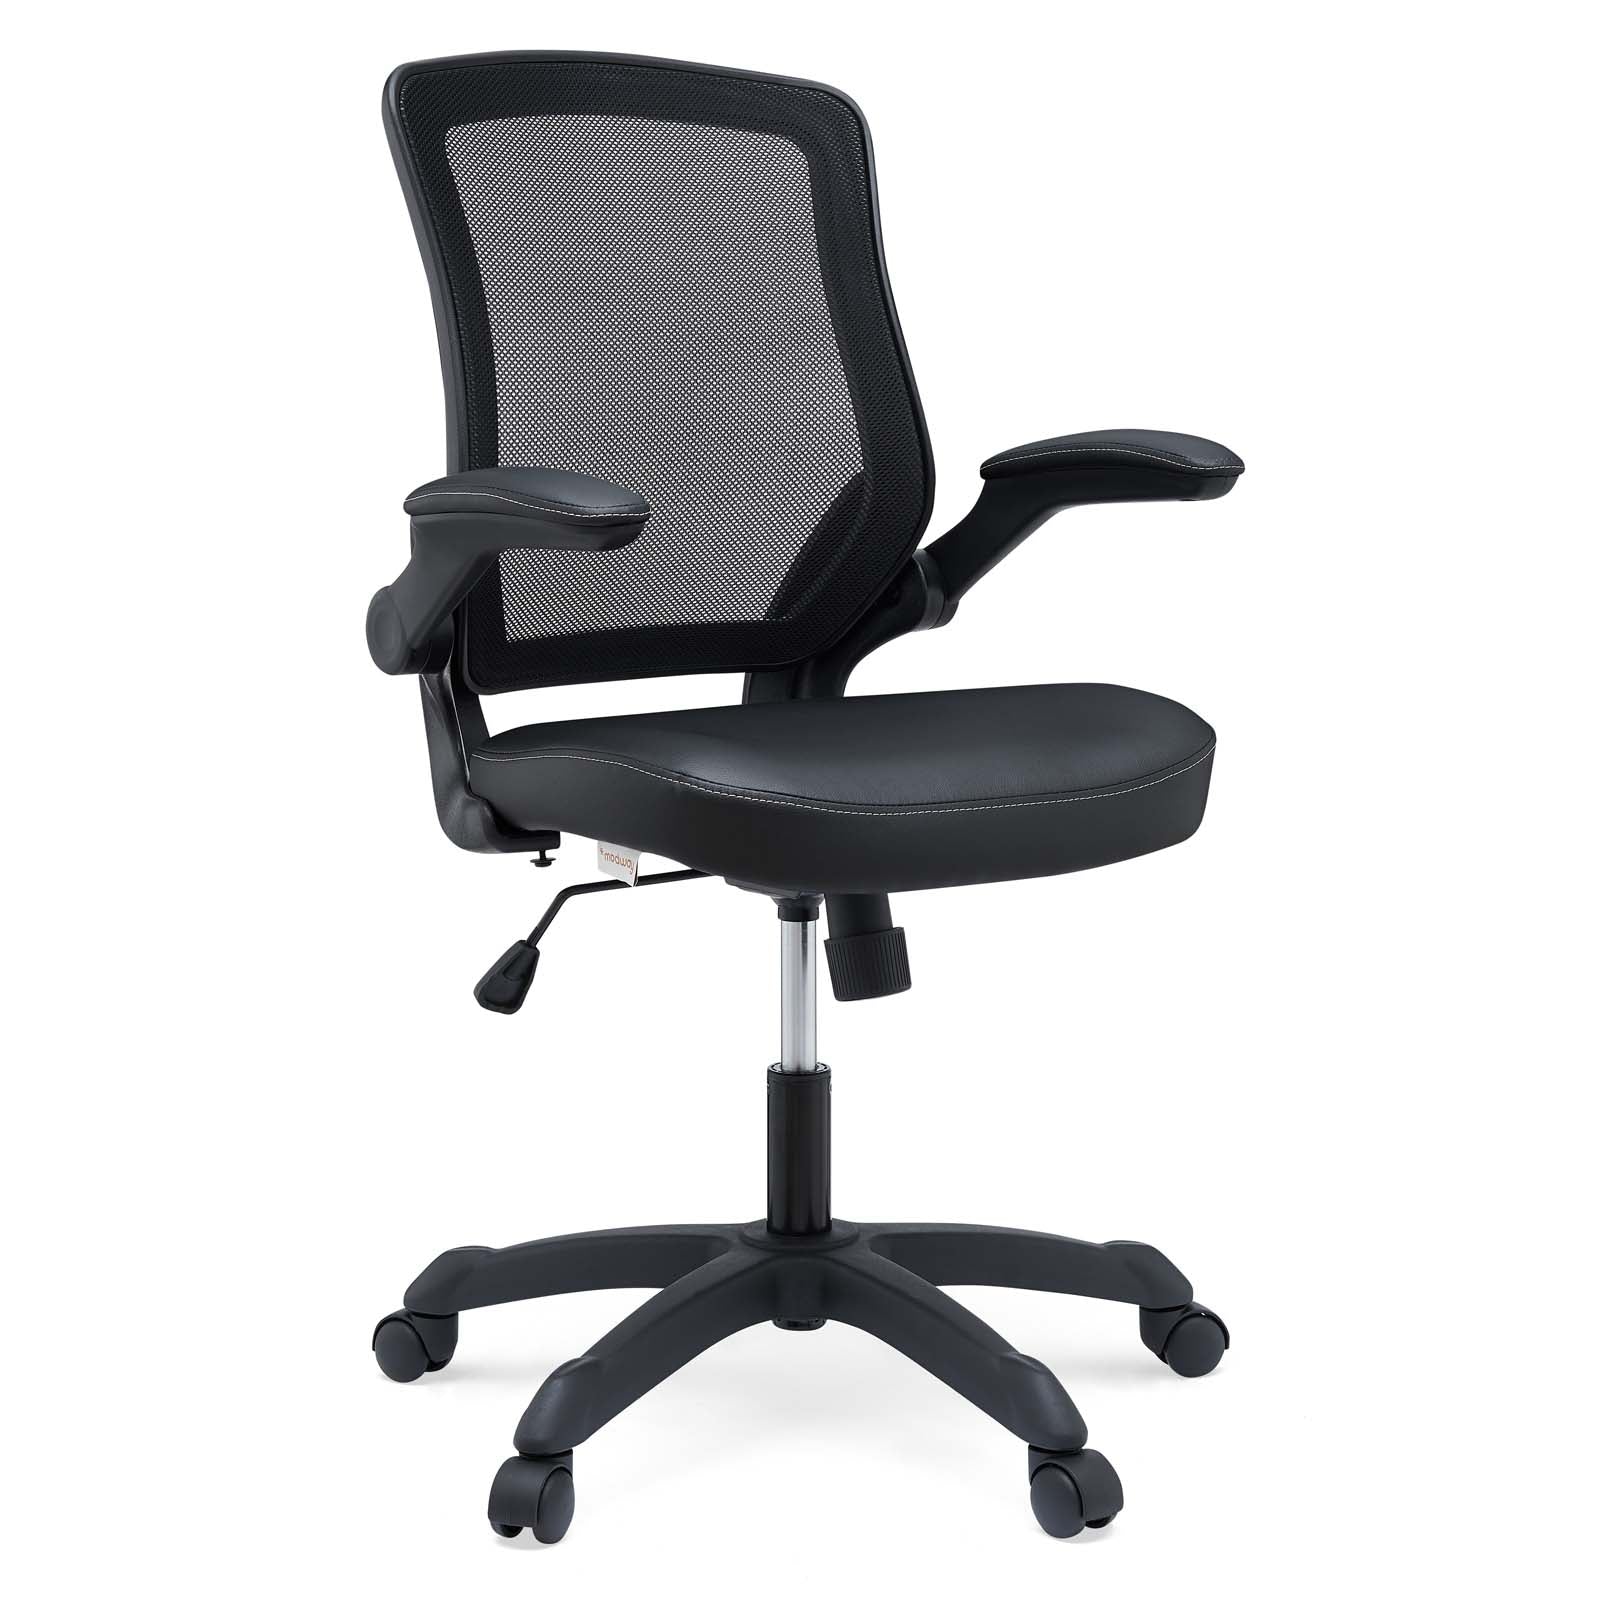 Shop Veer Office Chair with Vinyl Seat at BUILDMyplace